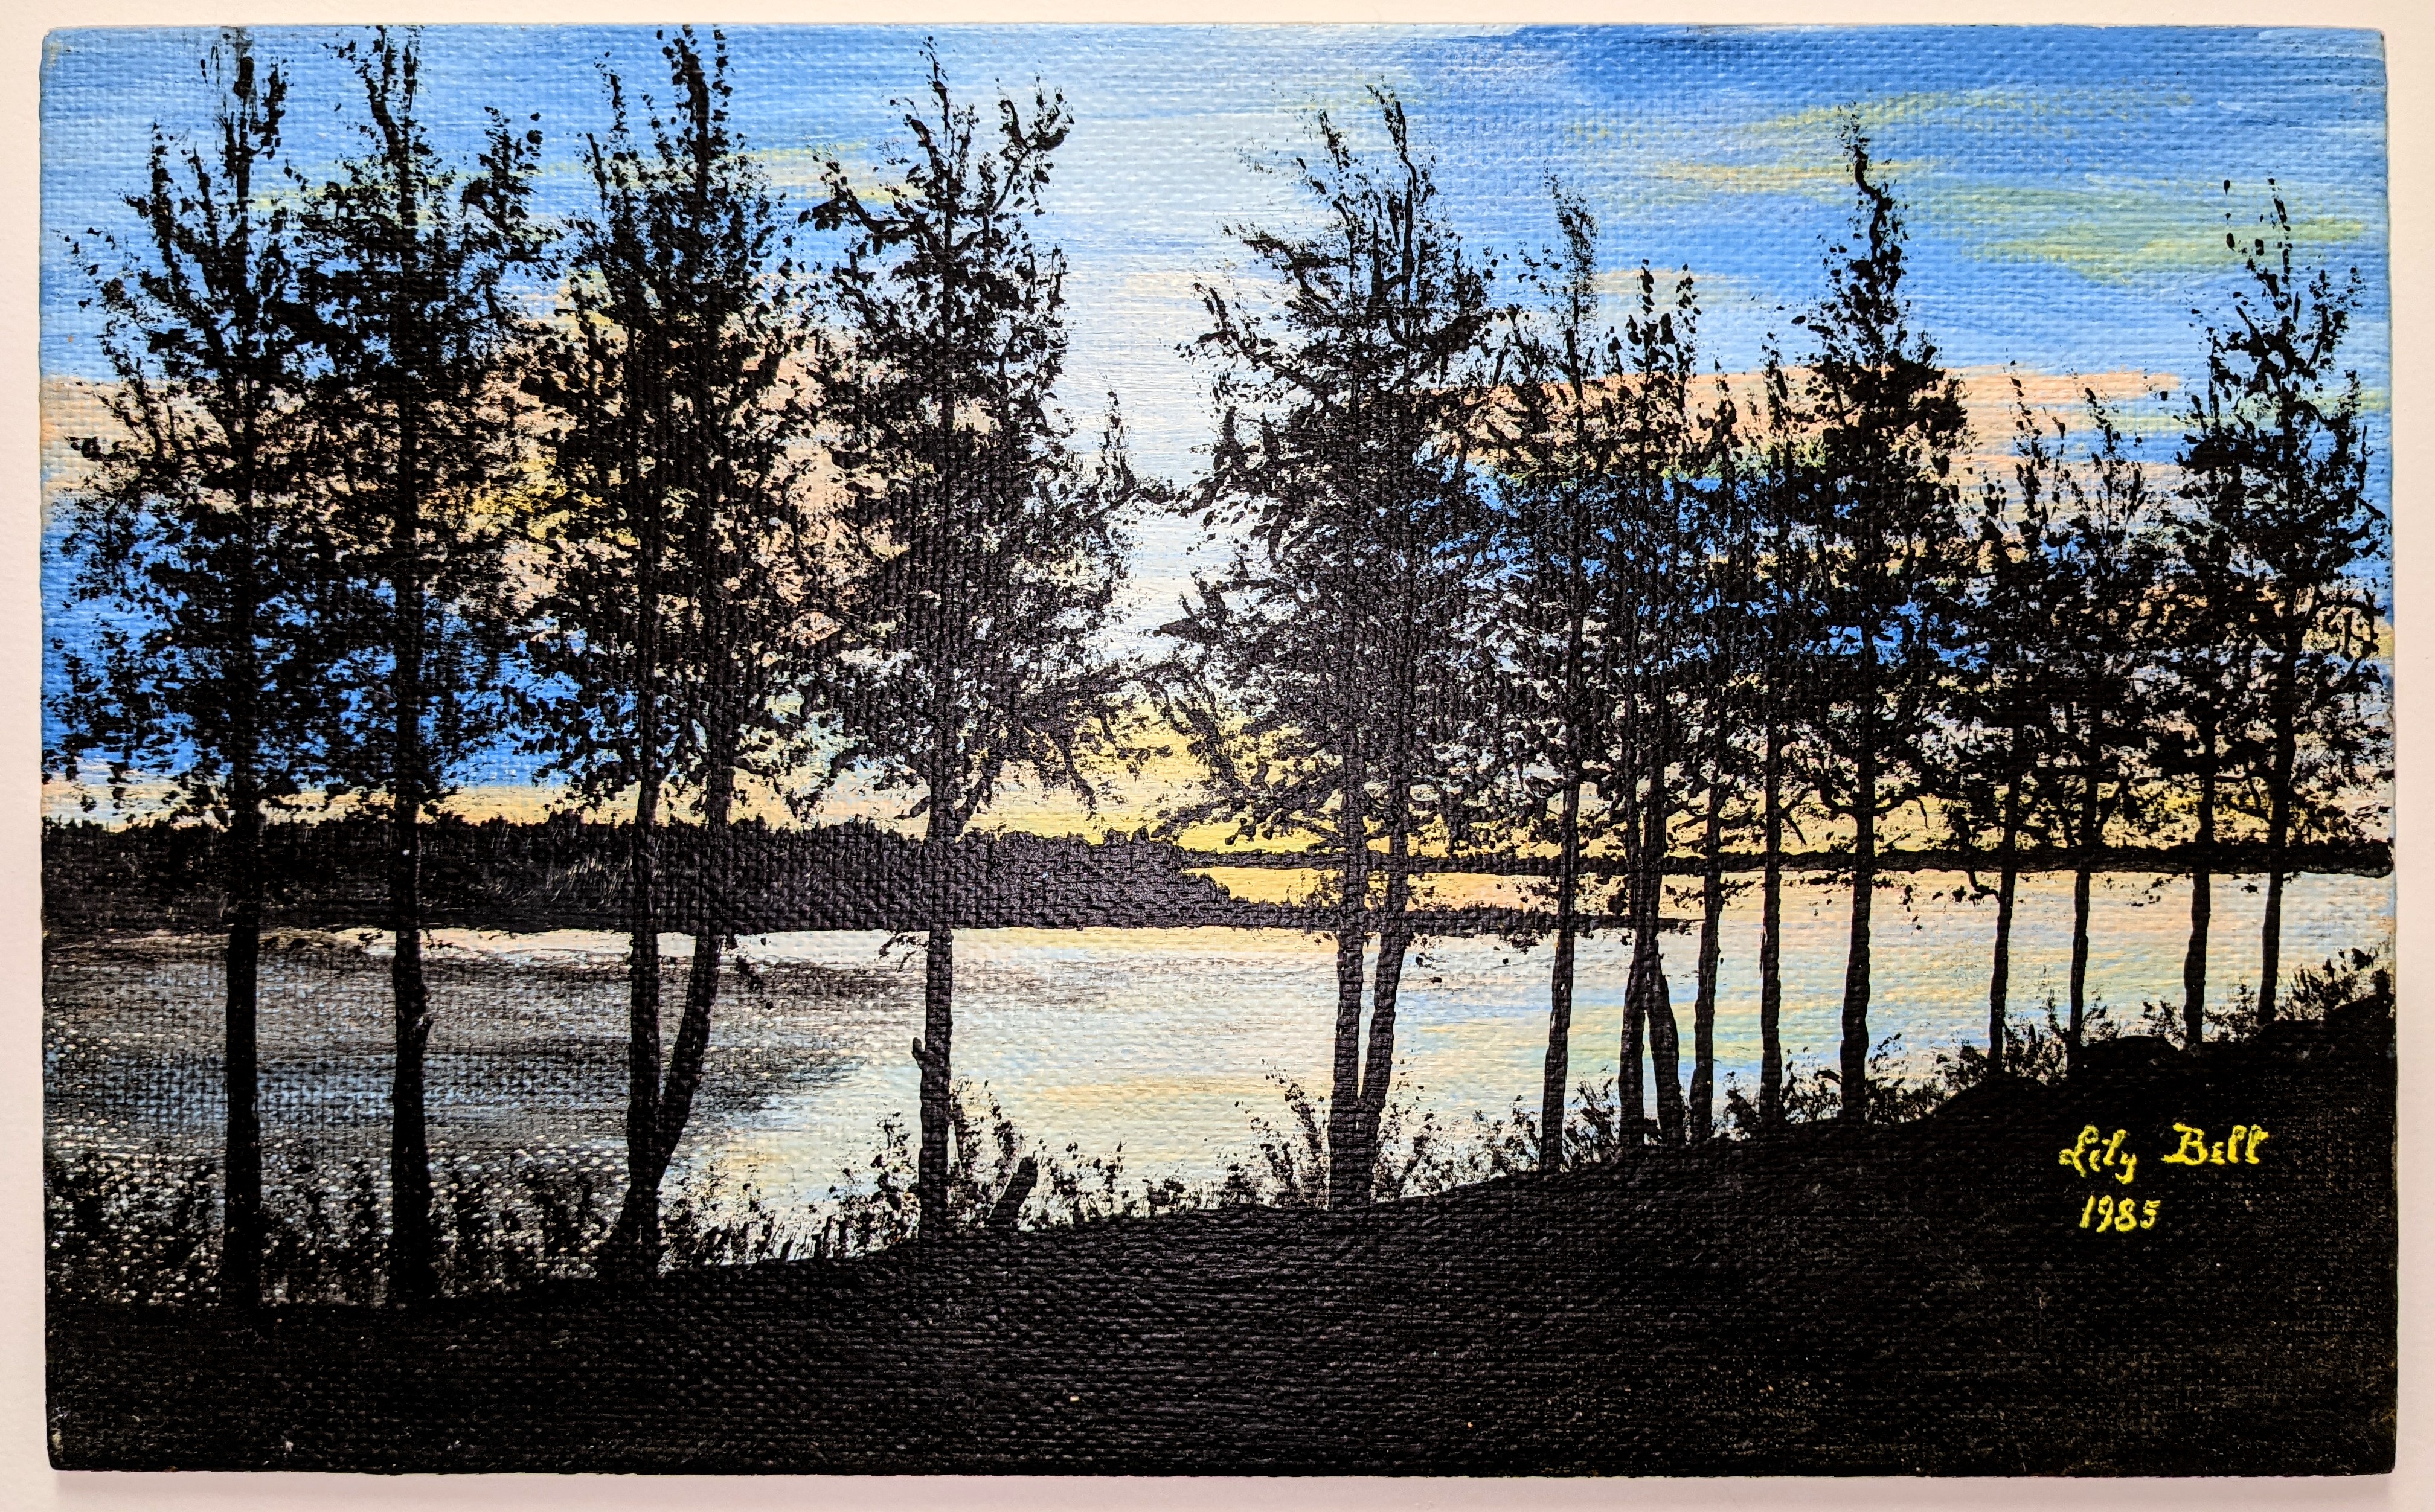 Today is international artist day! We have chosen this wonderful painting of the Peace River by Artist Lily Bell as a way to commemorate it! Lily loved to paint and loved Fort Vermilion. She moved to the area in 1963 to be a teacher - but was soon involved in the community in many other interesting ways. She had a column in the newspaper, was secretary of the legion and loved to paint. After retiring from teaching in 1968 she went to the Banff school of arts and brought her skills back to Fort - painting numerous pieces for public buildings throughout town. The  piece above is an original that is labelled as "Midnight June 21st East Vermilion Island" and is painted on a piece of wall panelling. If it looks familiar, that's likely because there is a large re-creation of it that hangs prominently at the Hallet Hansley Legion!

25/10/2021
2020.07.14 / Cranna, Marilee